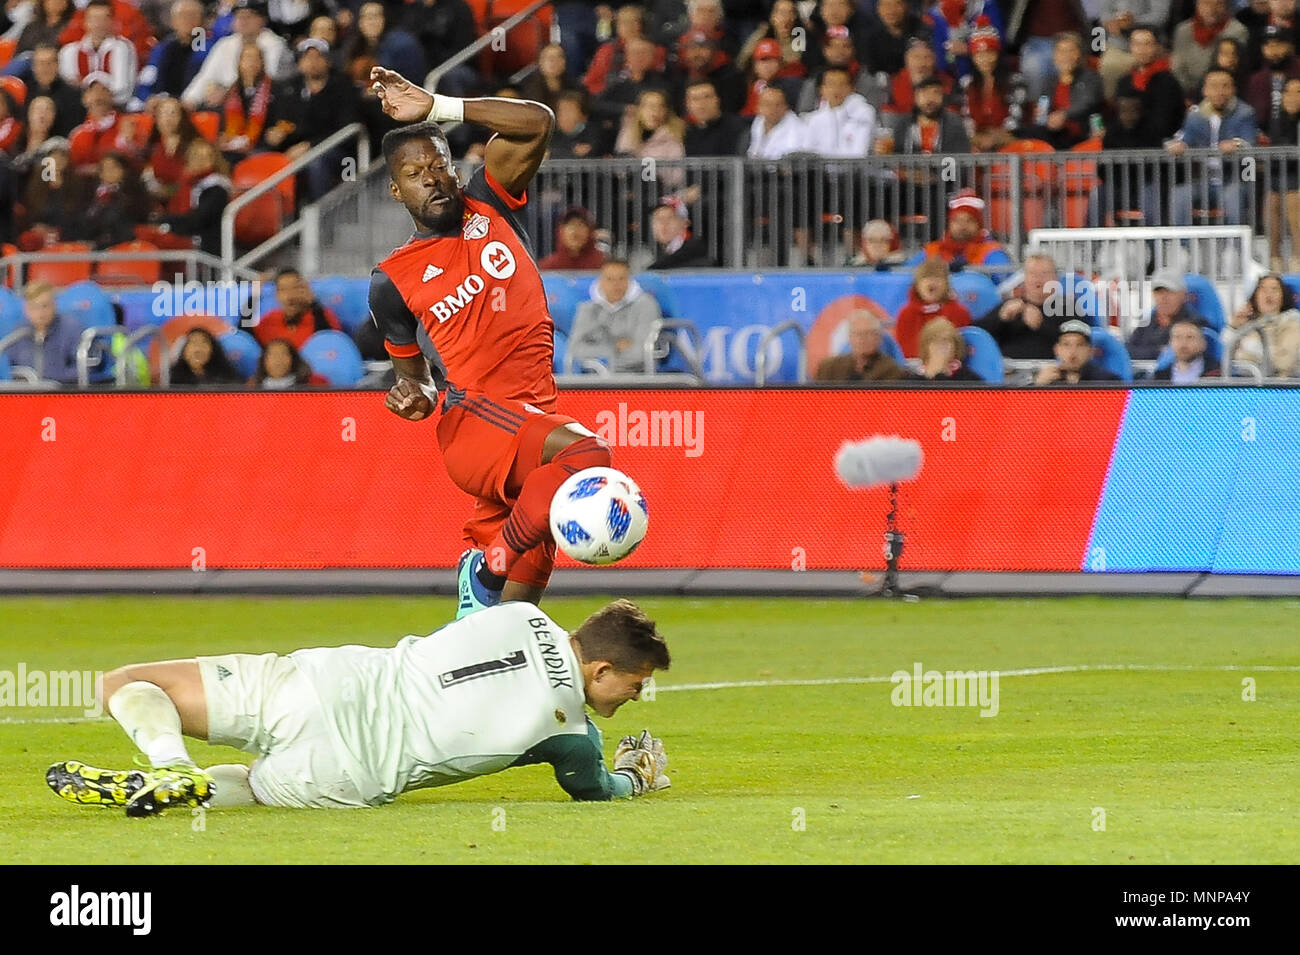 Tosaint Ricketts (87) punches the ball through the goalkeeper during 2018 MLS Regular Season match between Toronto FC (Canada) and  Orlando City SC (USA) at BMO Field (Score 2:1) Stock Photo